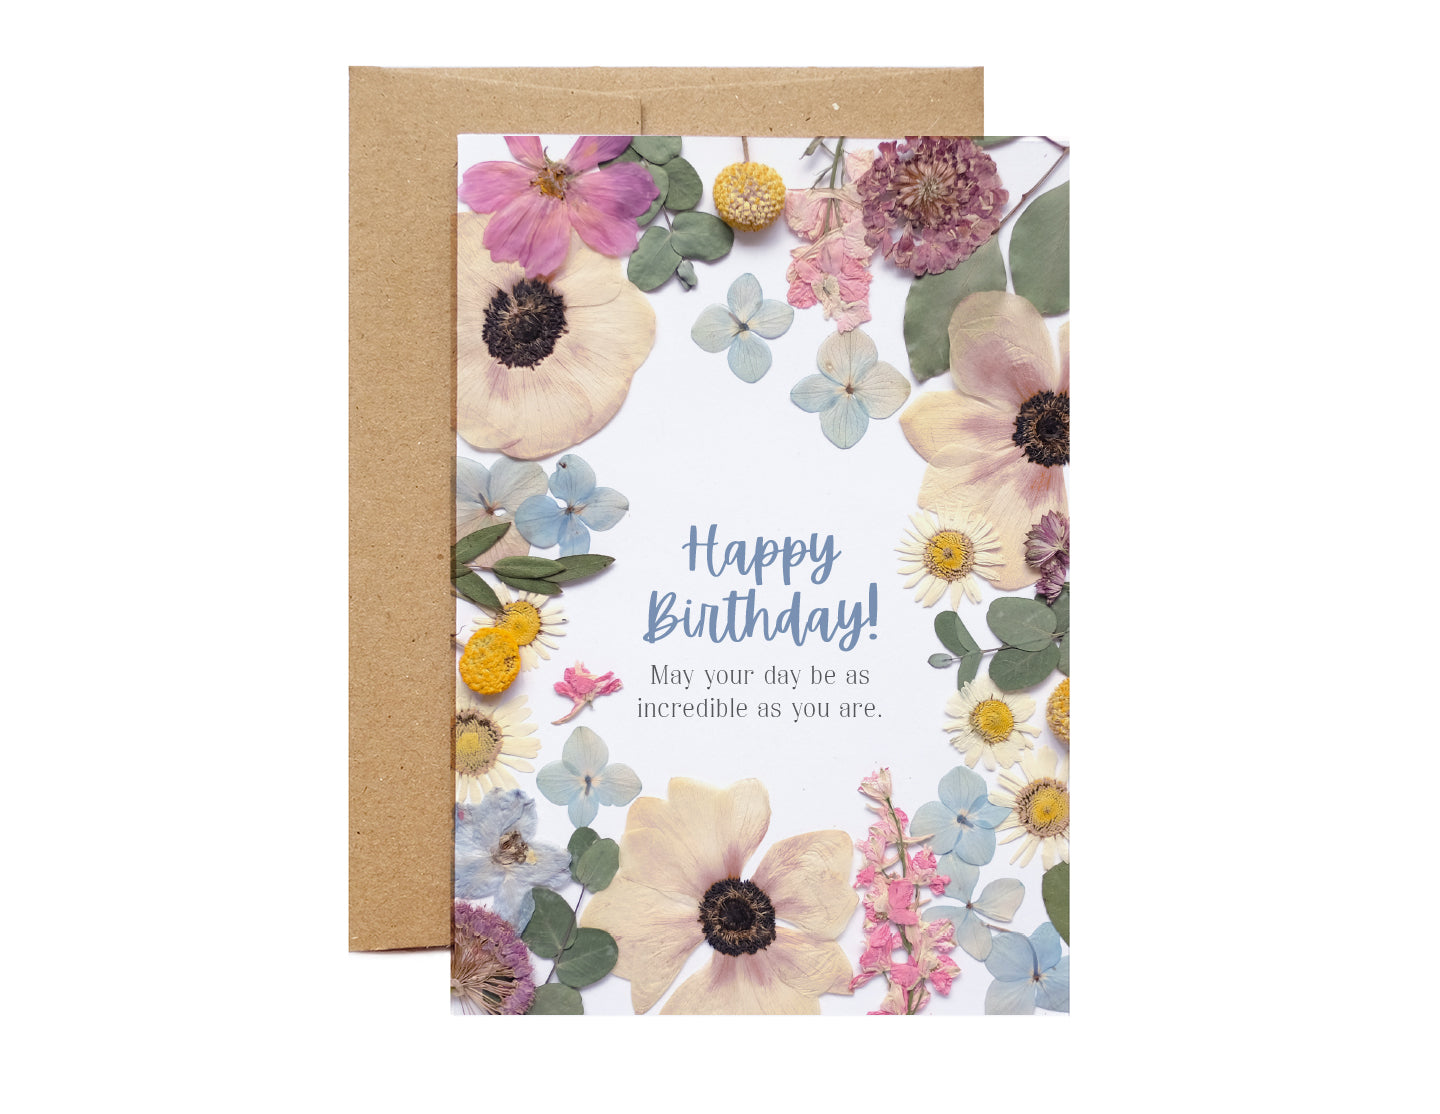 happy birthday, may your day be as incredible as you are. beautiful flower card 